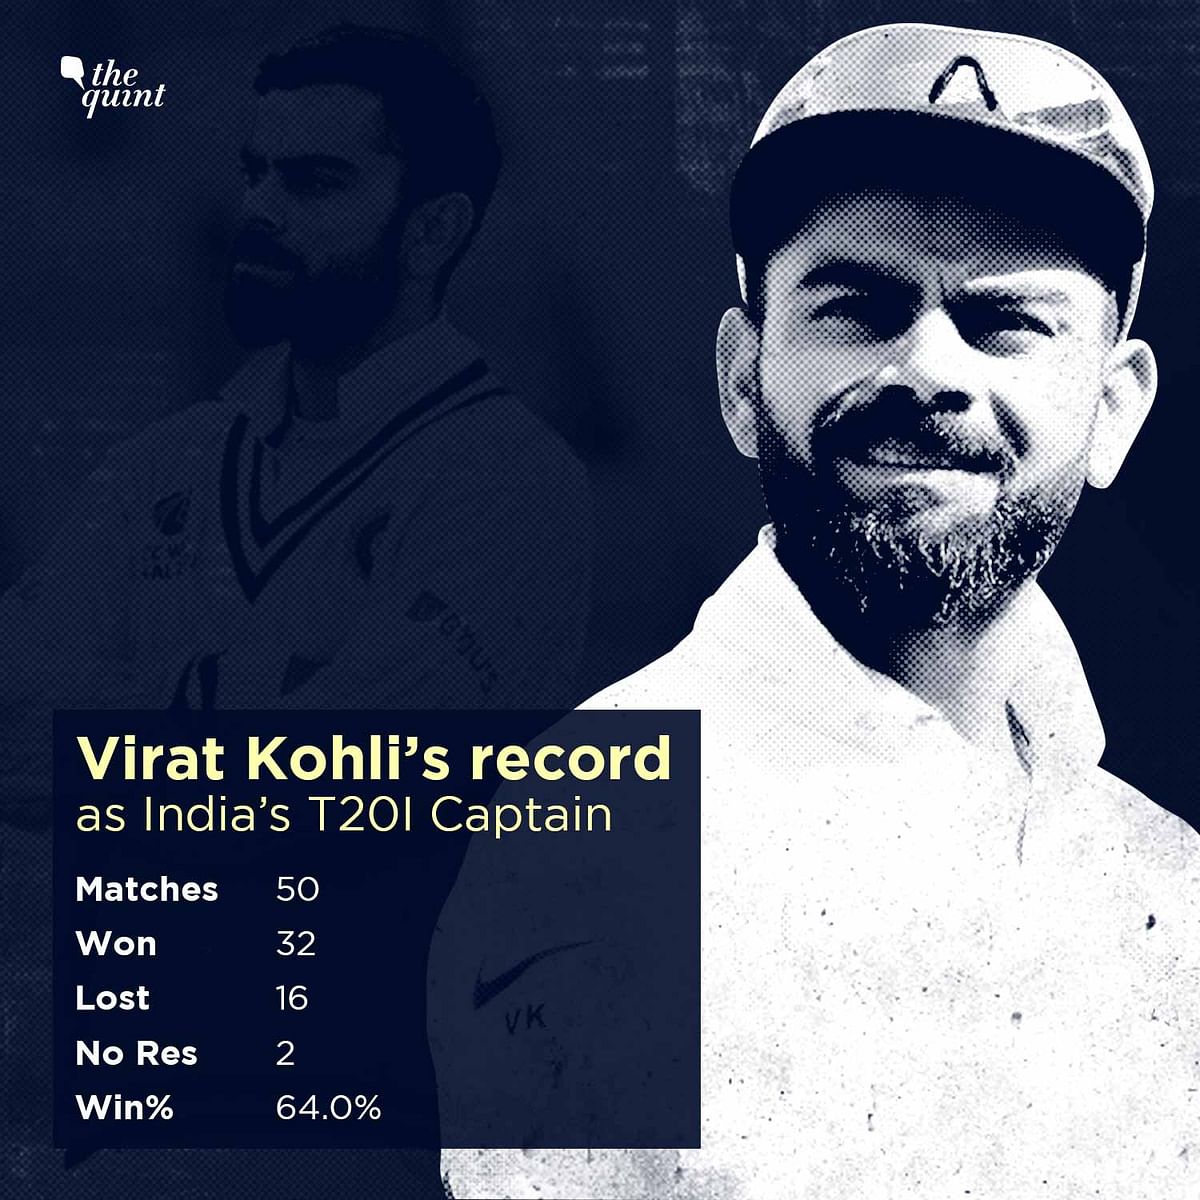 In a format that's been played since 1877, Kohli ends his tenure among the top four captains in Test cricket.